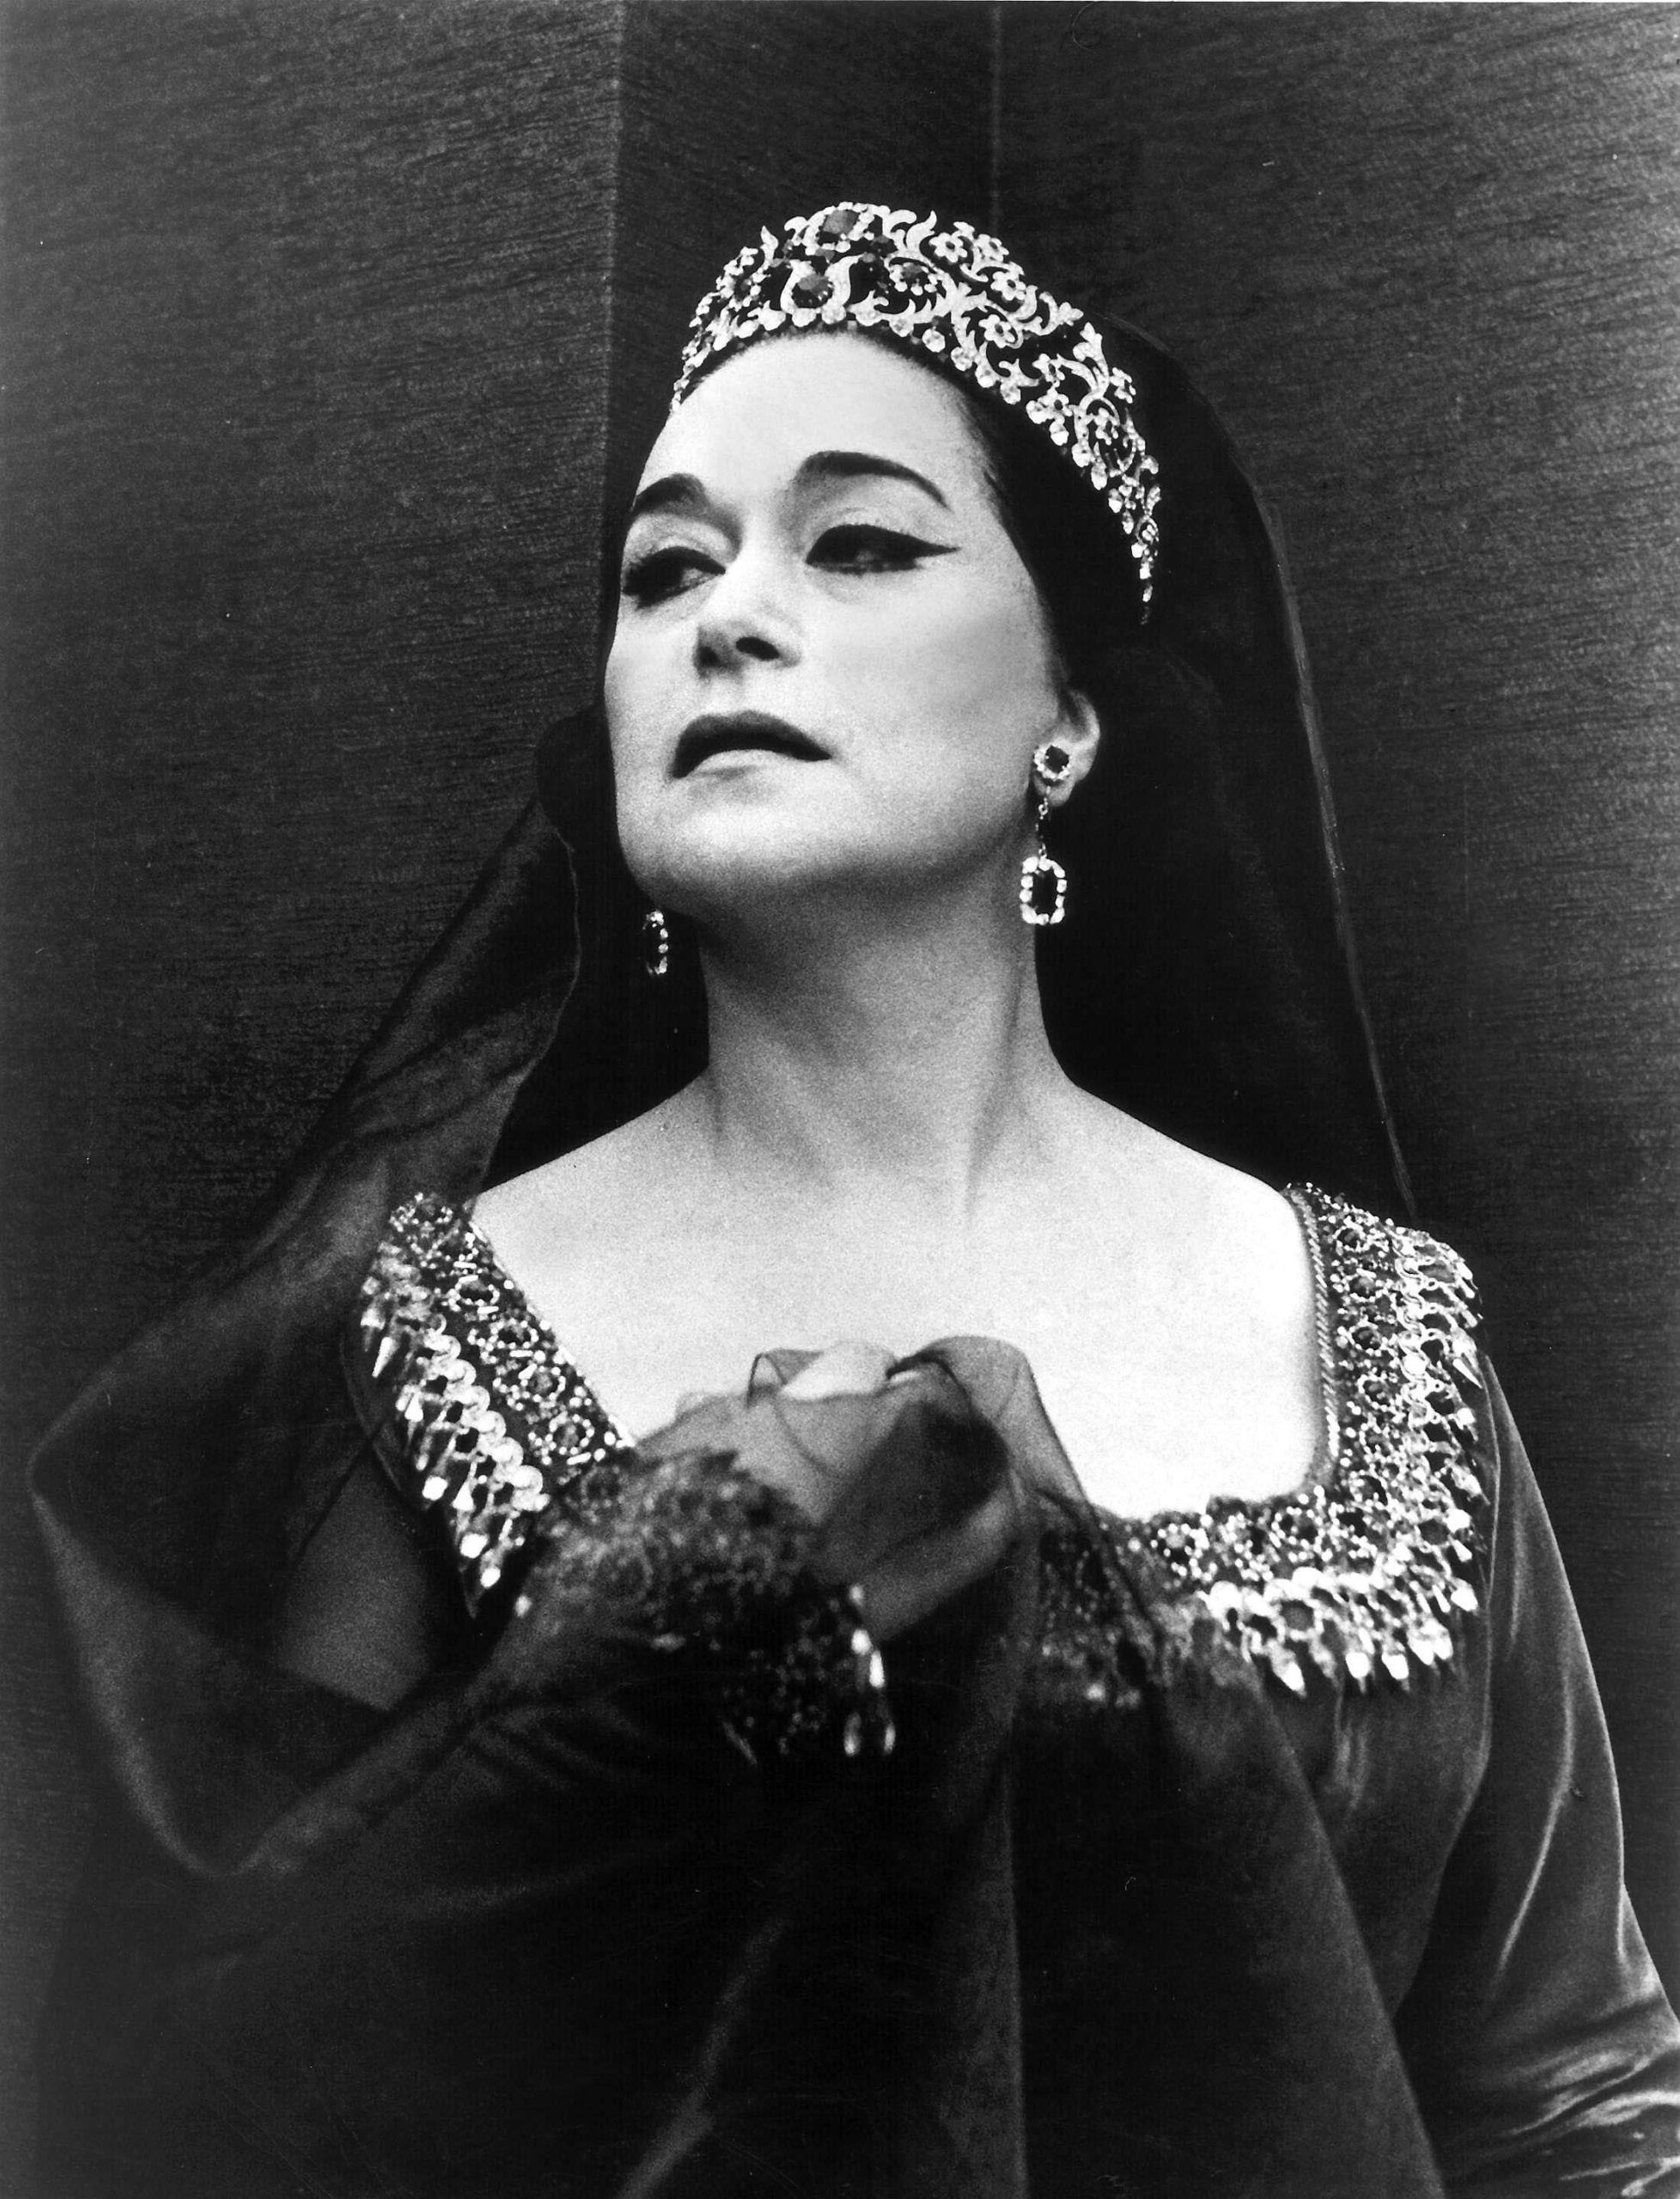 Turkish soprano Leyla Gencer performed at the famous La Scala opera house in Italy for the first time in 1957.